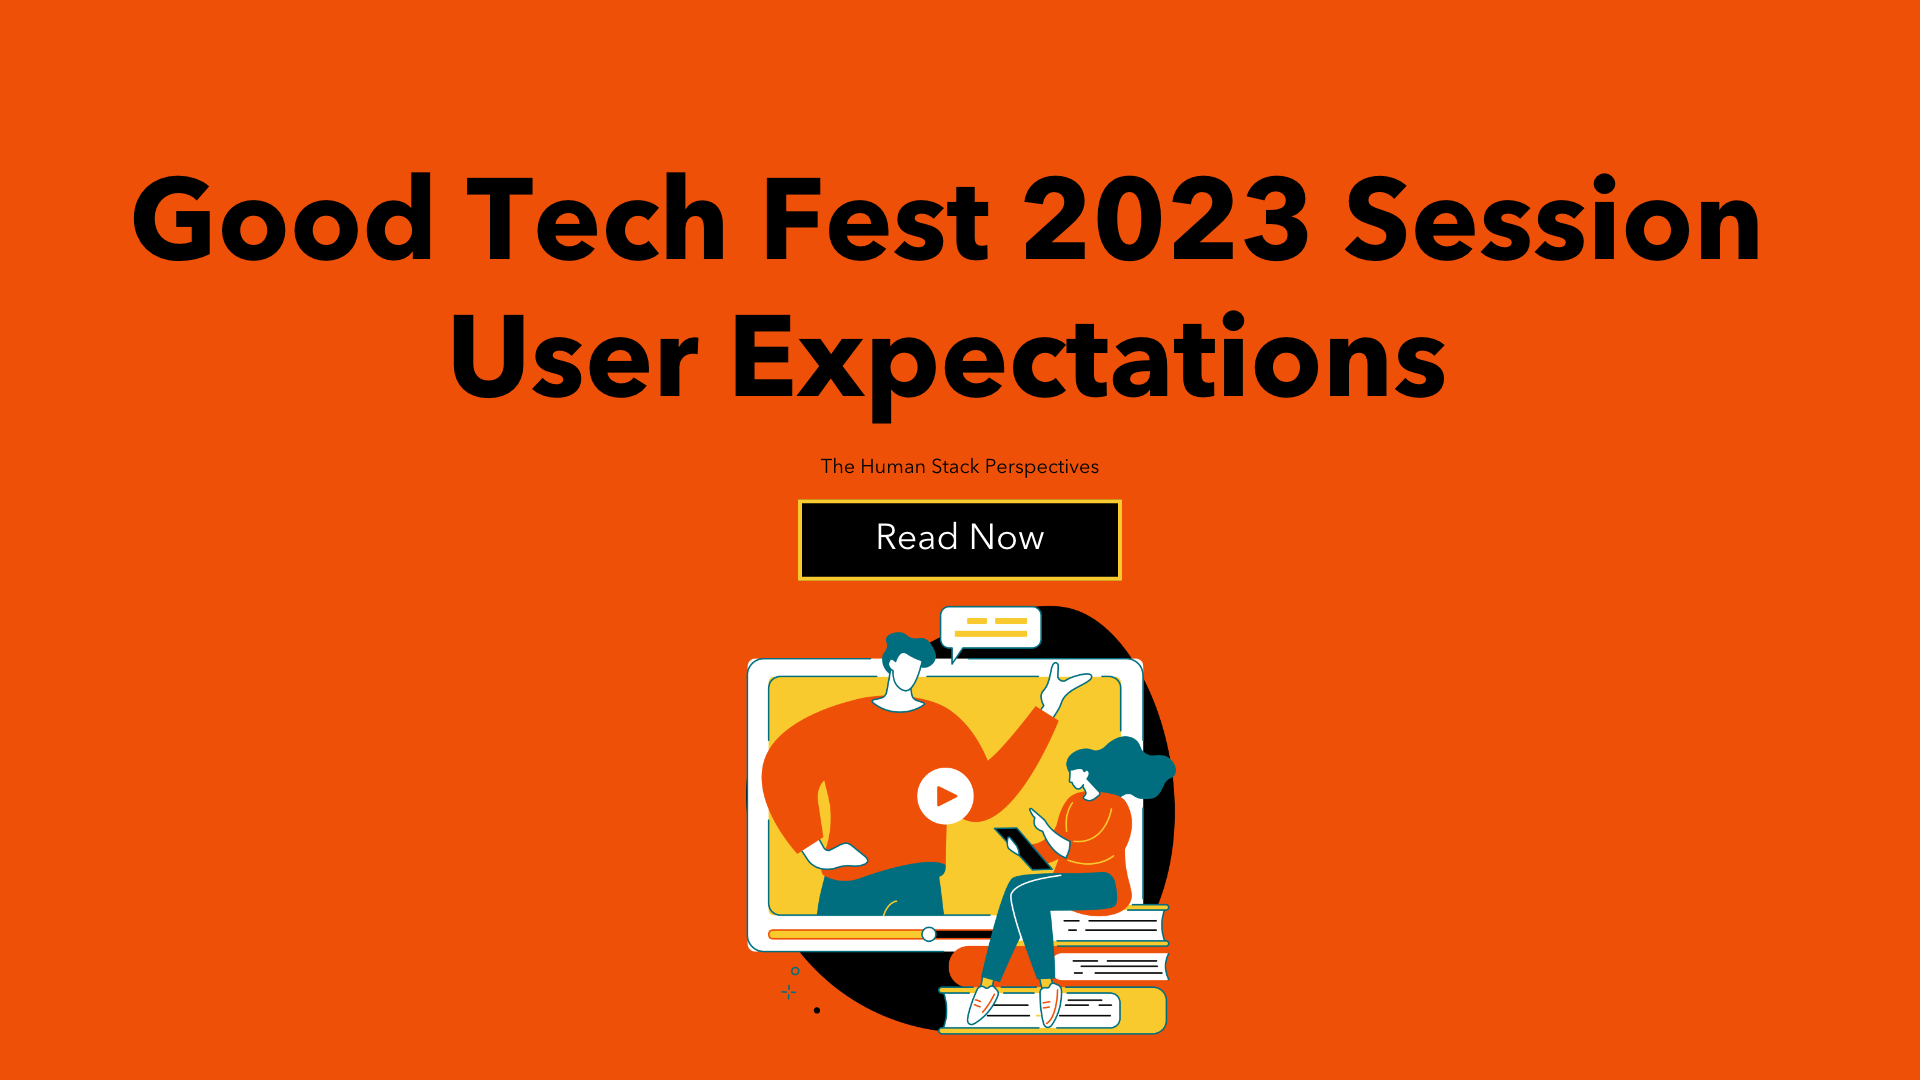 Good Tech Fest 2023 User Expectations Graphic